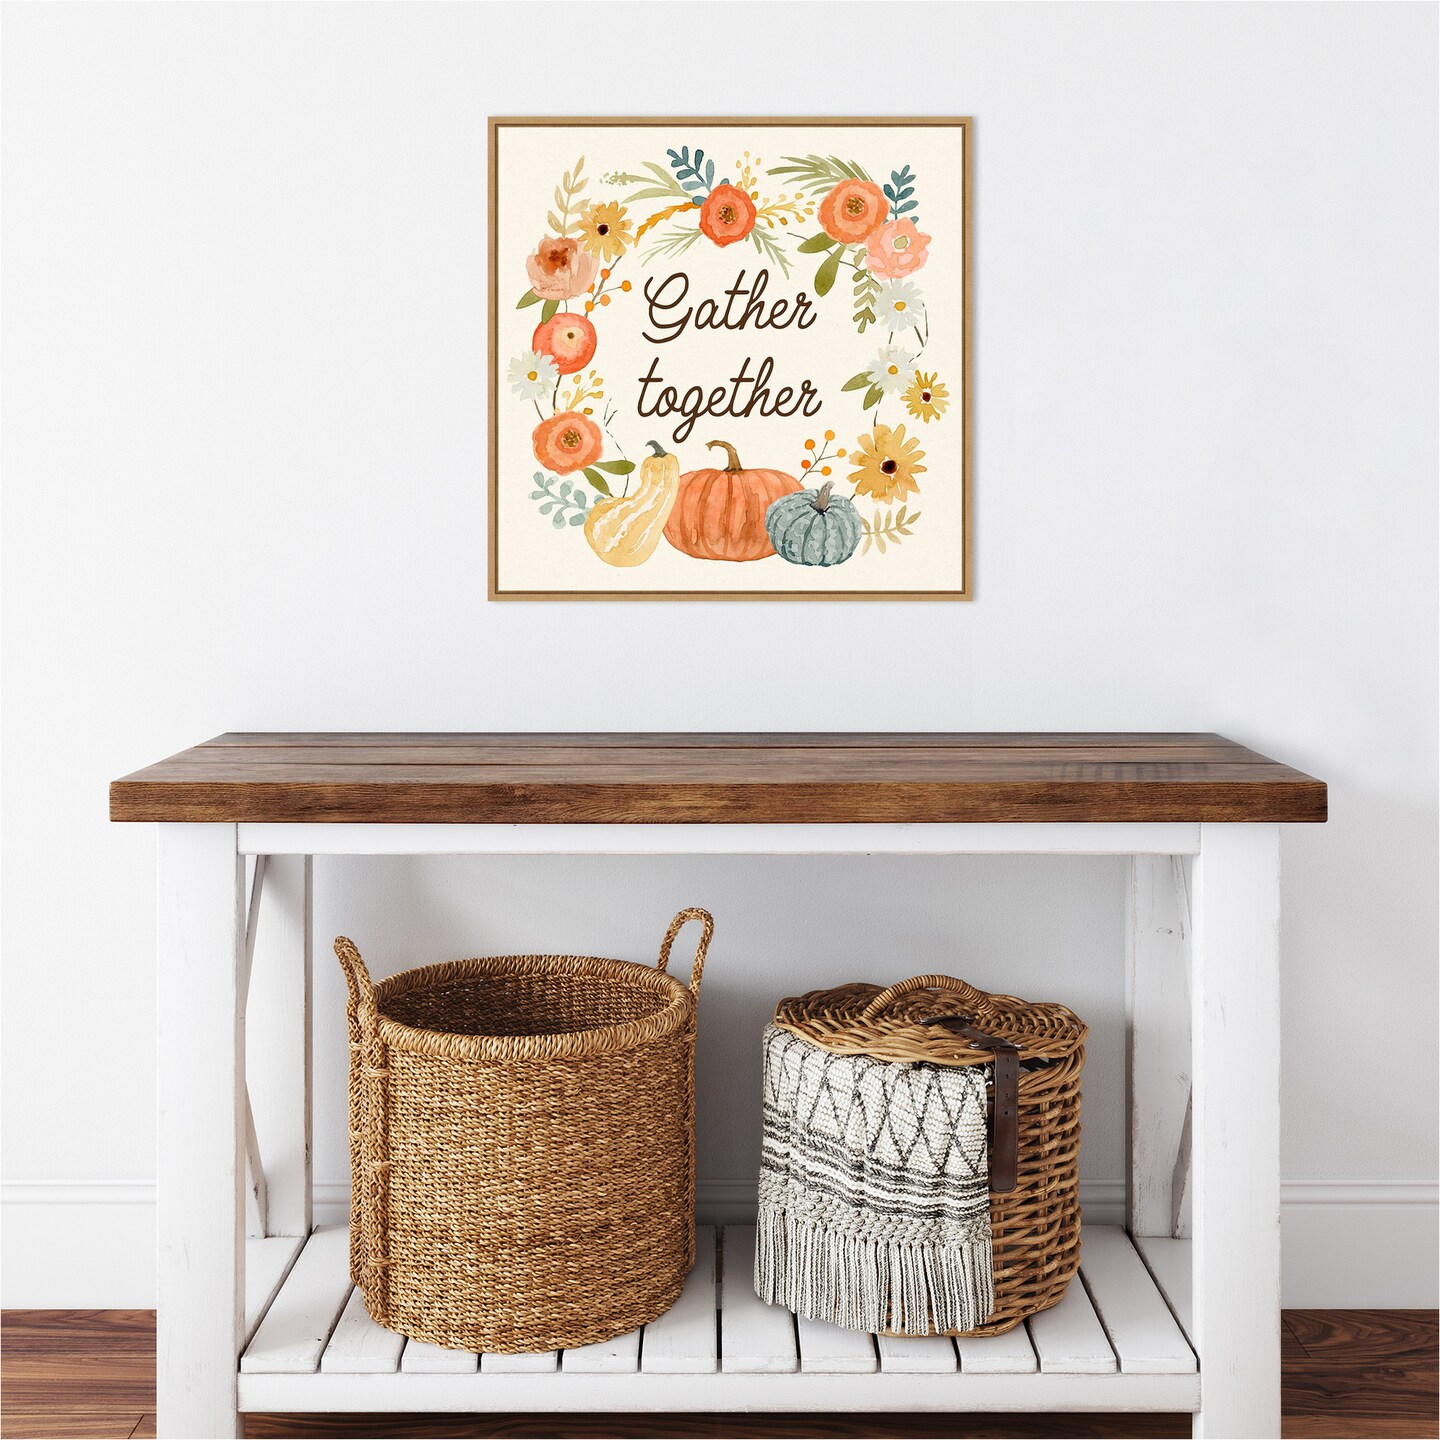 Harvest Home II by Victoria Barnes 22-in. W x 22-in. H. Canvas Wall Art Print Framed in Natural